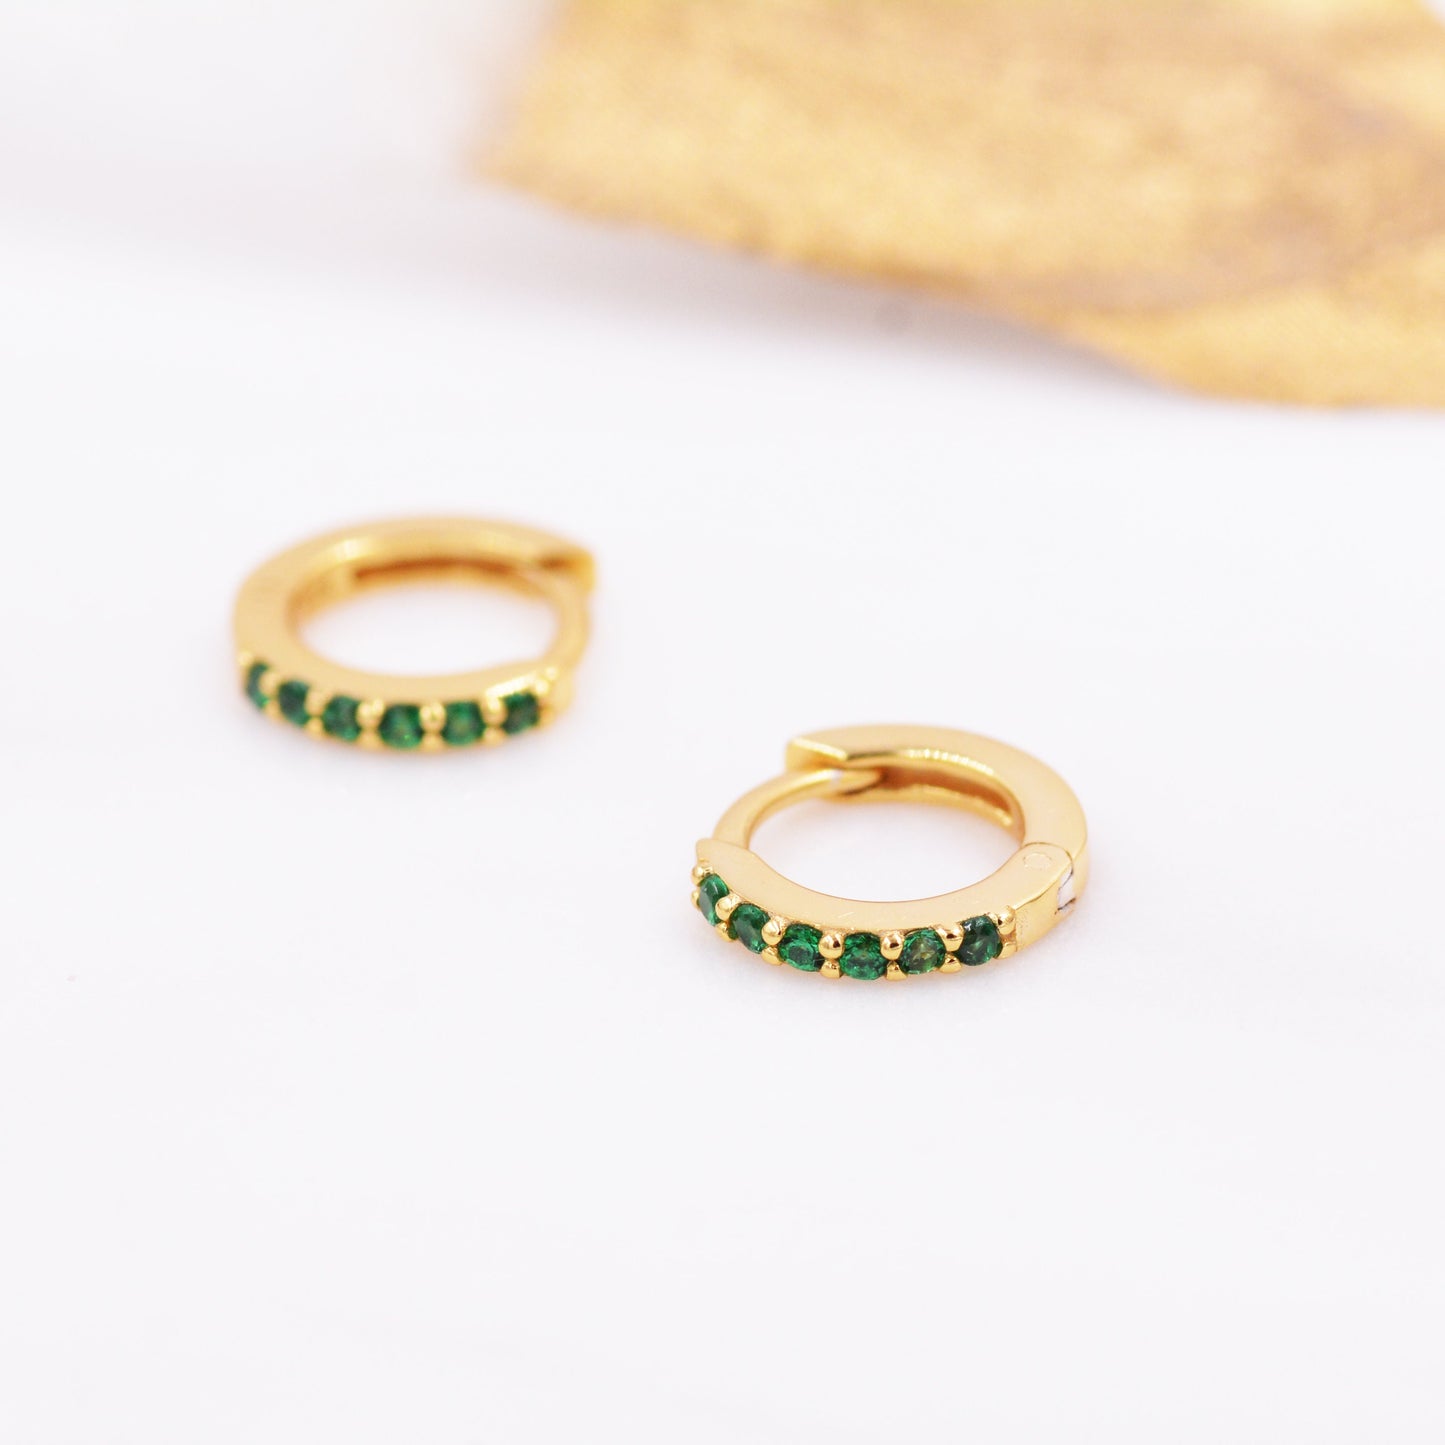 Emerald Green Crystal Huggie Hoop Earrings in Sterling Silver with Pave CZ Crystals, Gold or Silver, Tiny and Dainty, Simple Hoop Earrings